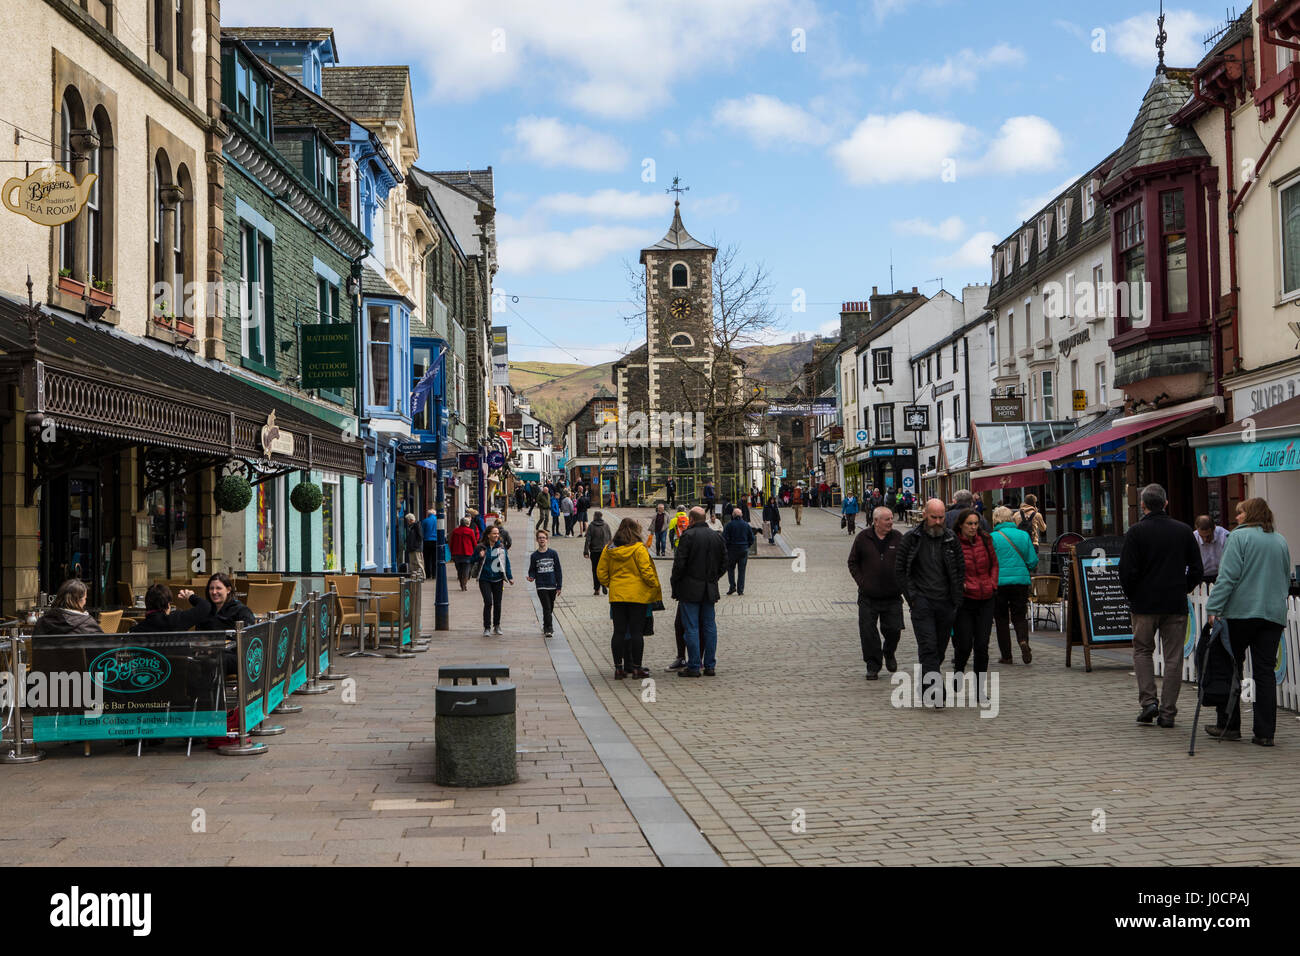 KESWICK, UK - APRIL 7TH 2017: The beautiful town centre in Keswick, located in the Lake District in Cumbria, UK, on 7th April 2017. Stock Photo